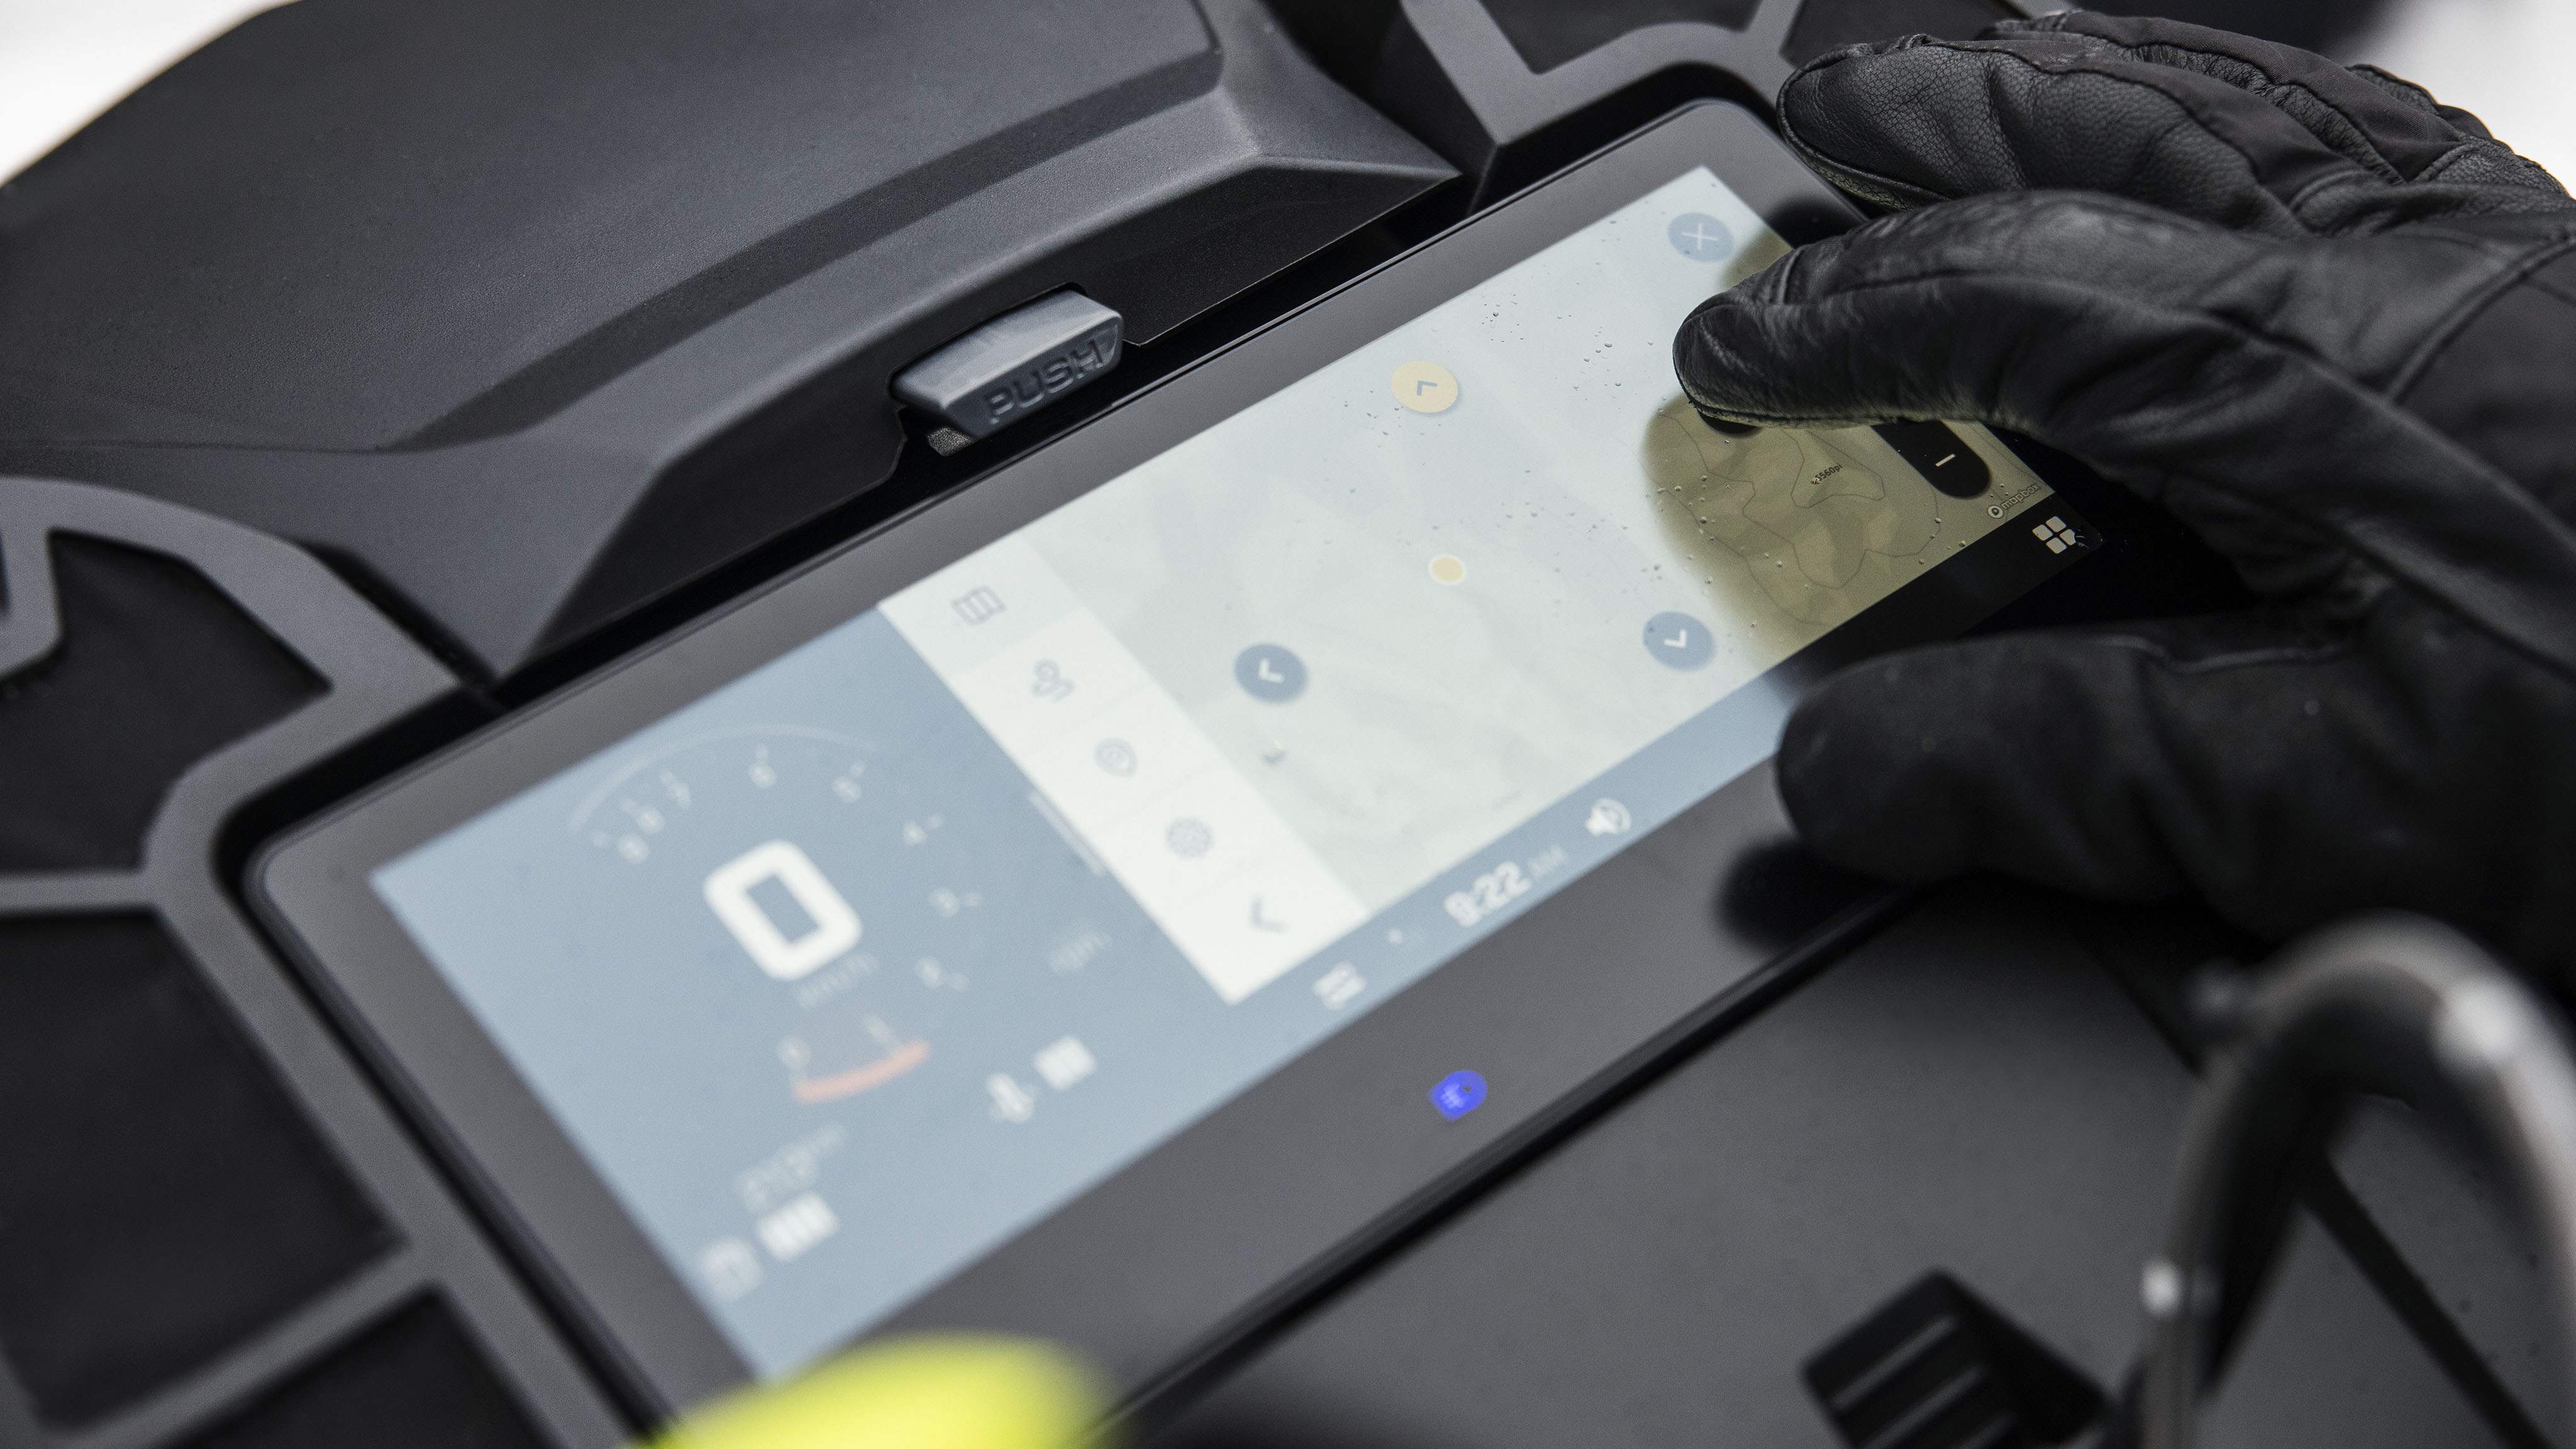 10.25" color touchscreen display on the Ski-Doo Summit